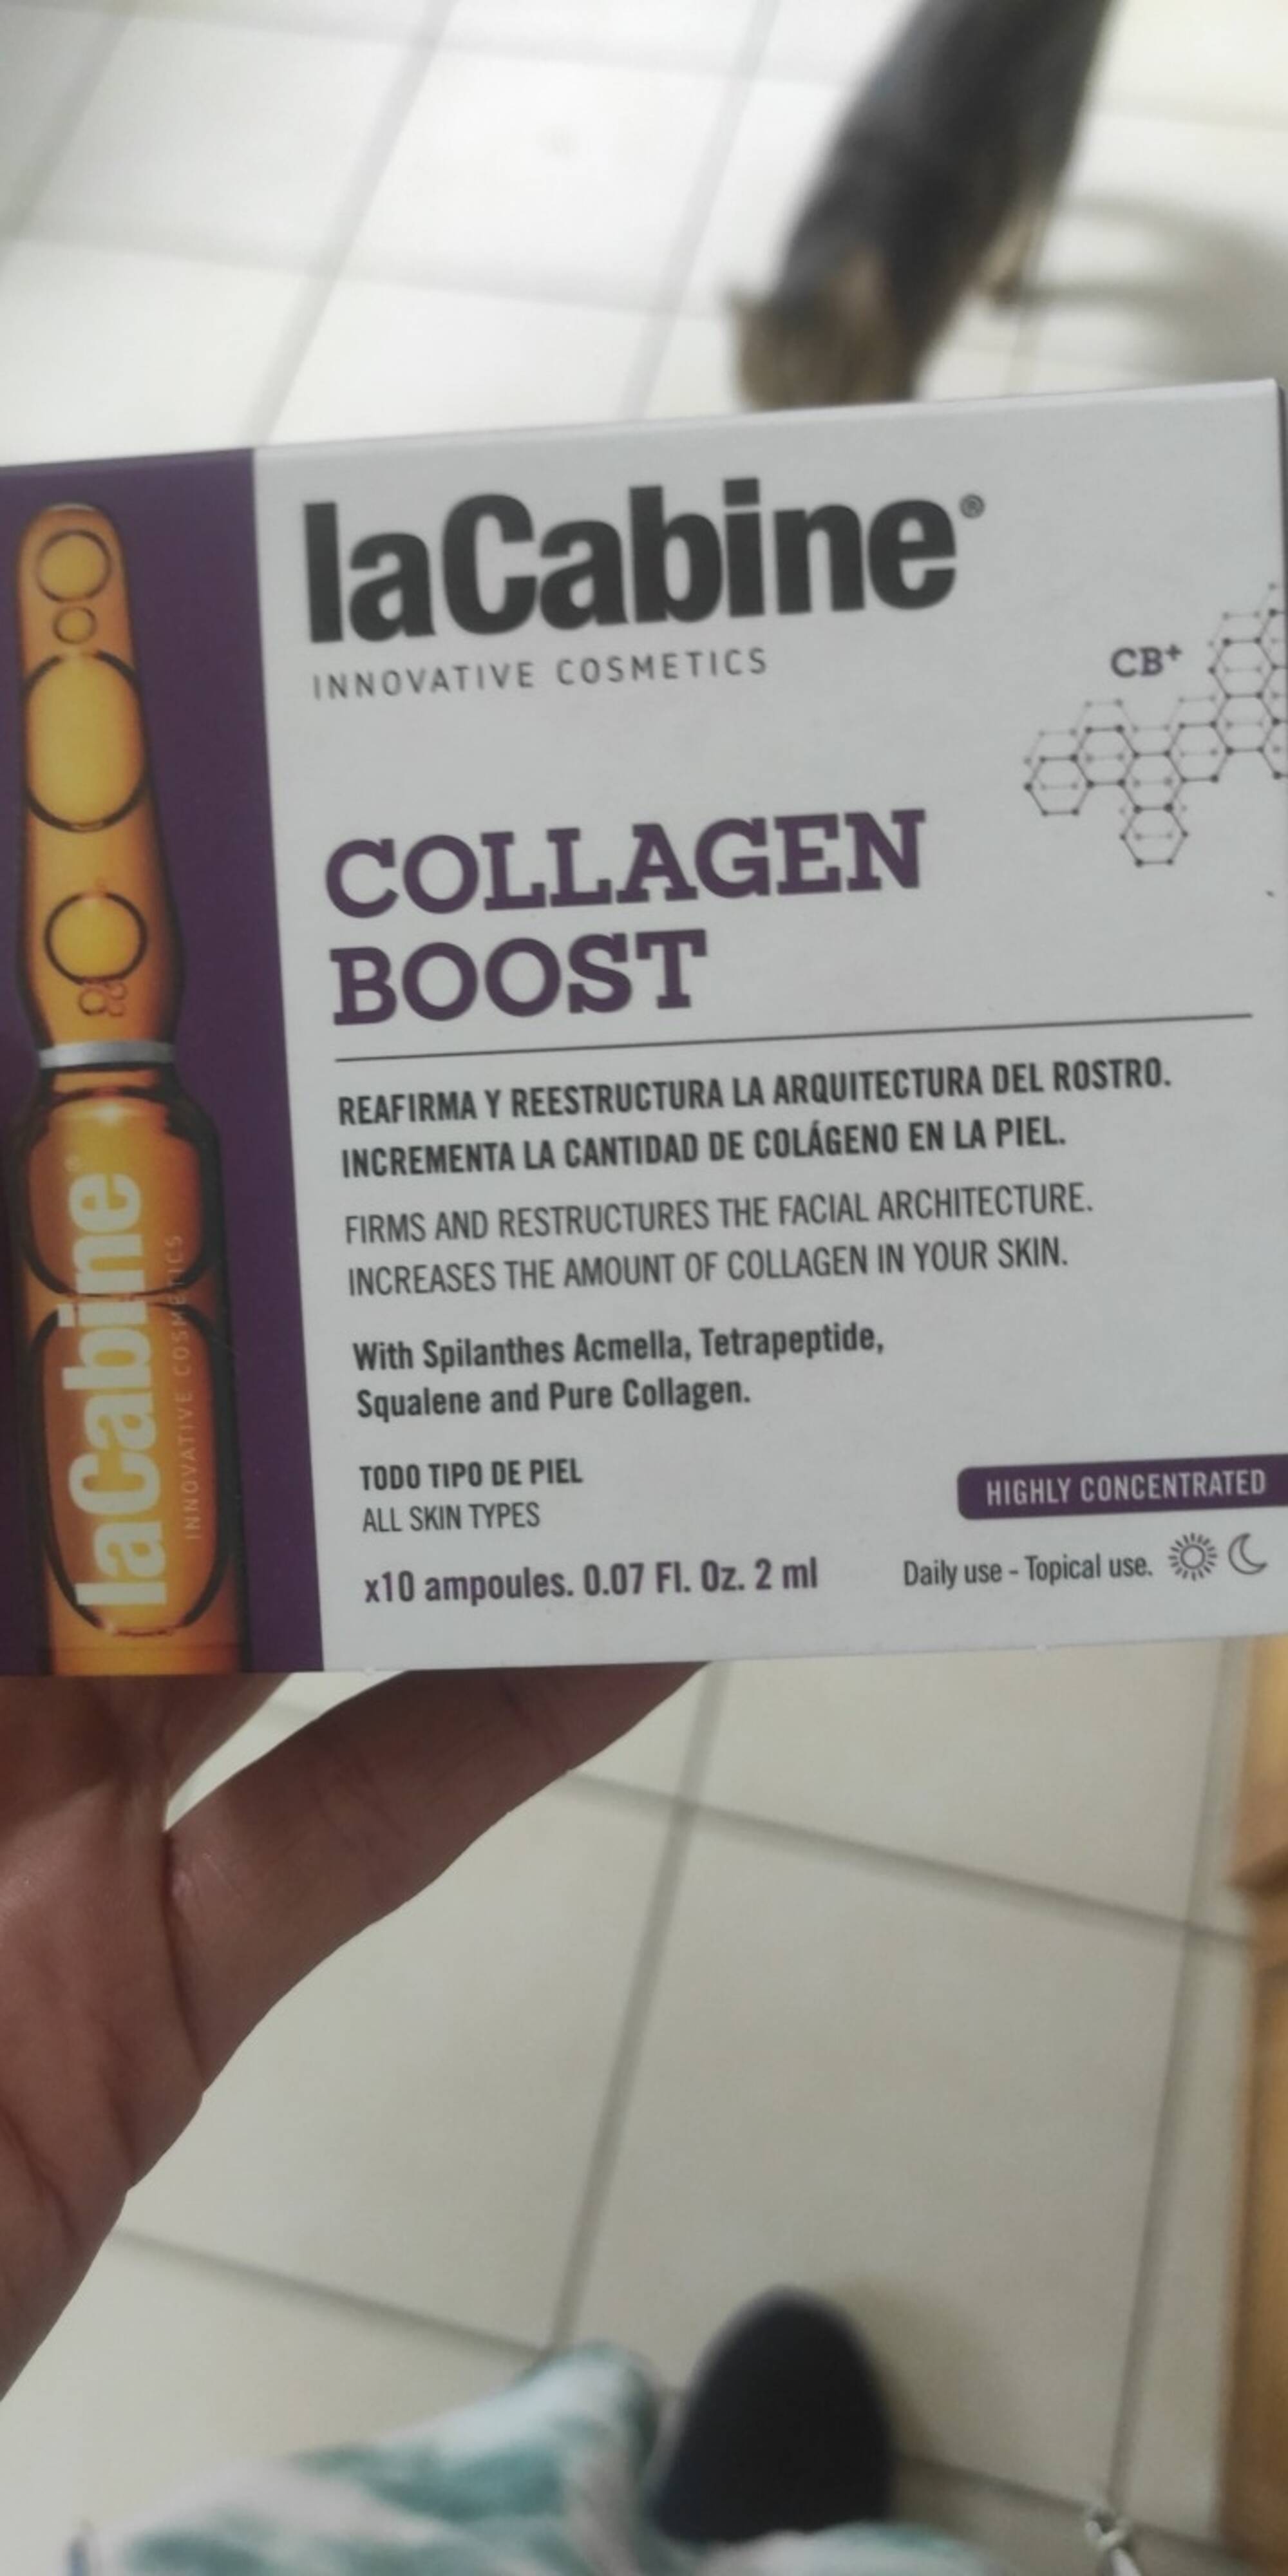 LA CABINE - Collagen boost - 10 ampoules firms and restructures facial